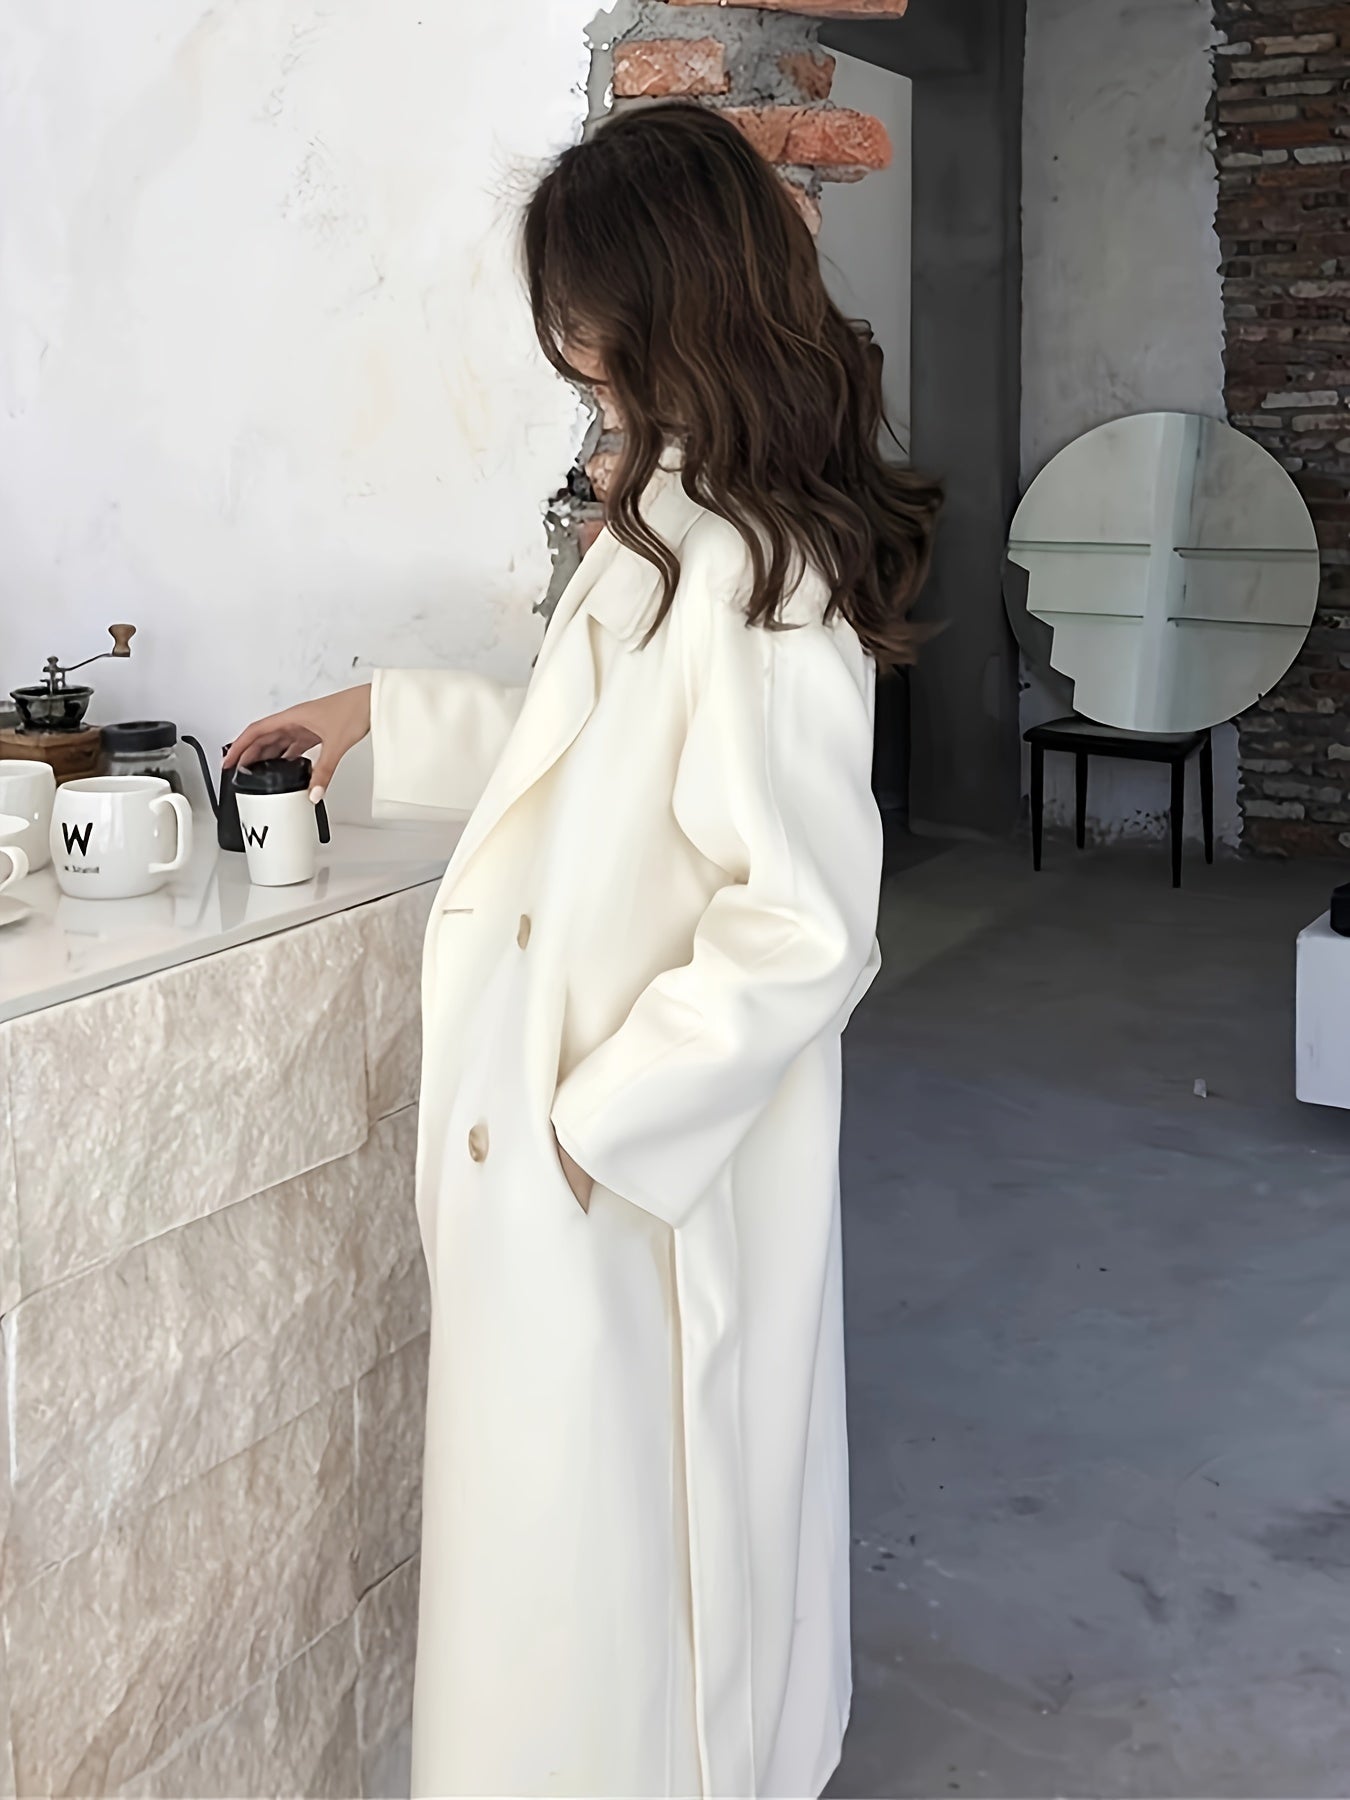 xieyinshe  Solid Double-breasted Tied Coat, Casual Long Sleeve Lapel Coat For Fall & Winter, Women's Clothing